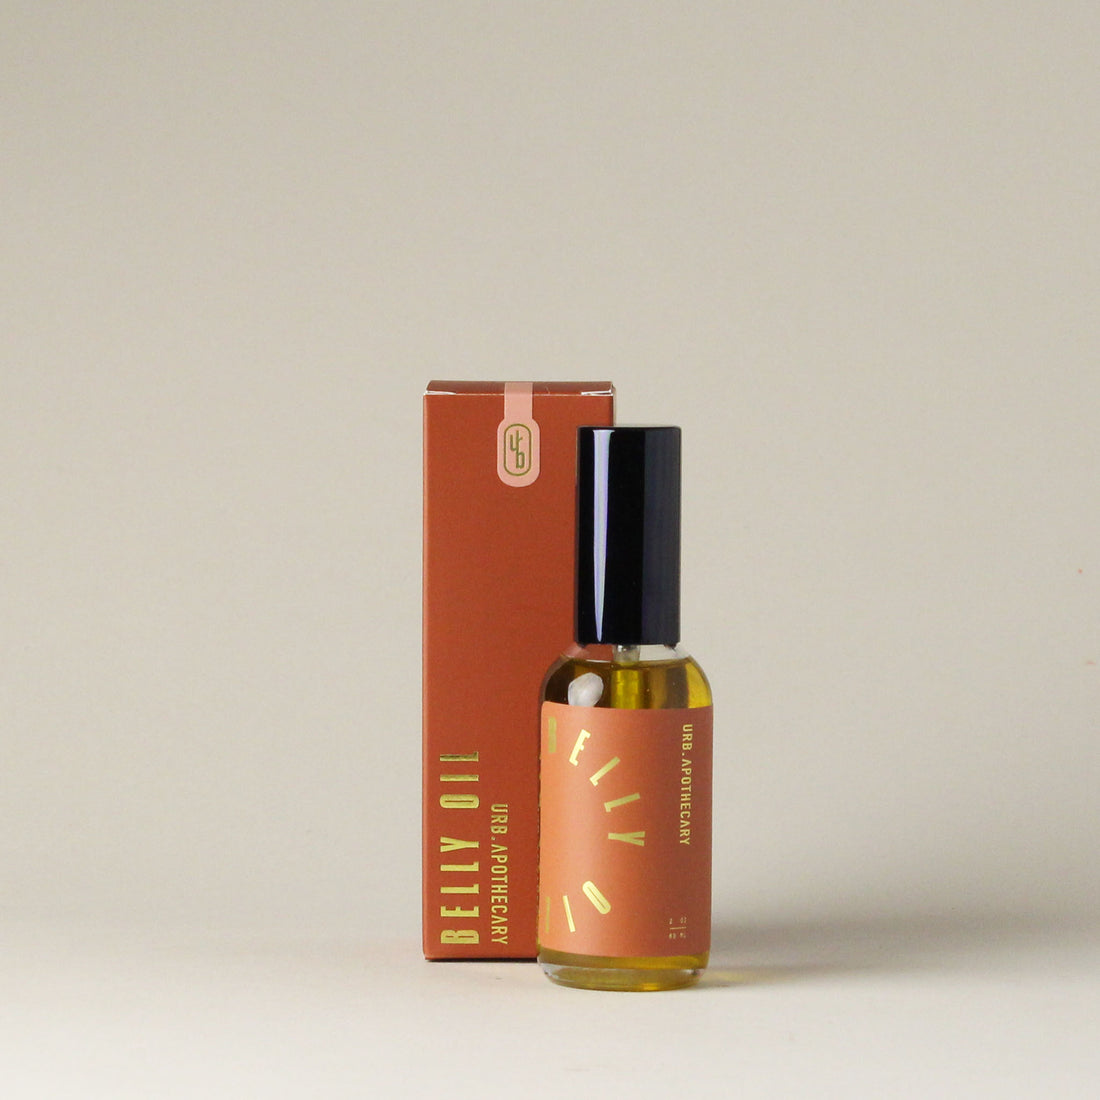 Belly Oil by URB Apothecary Box + Bottle